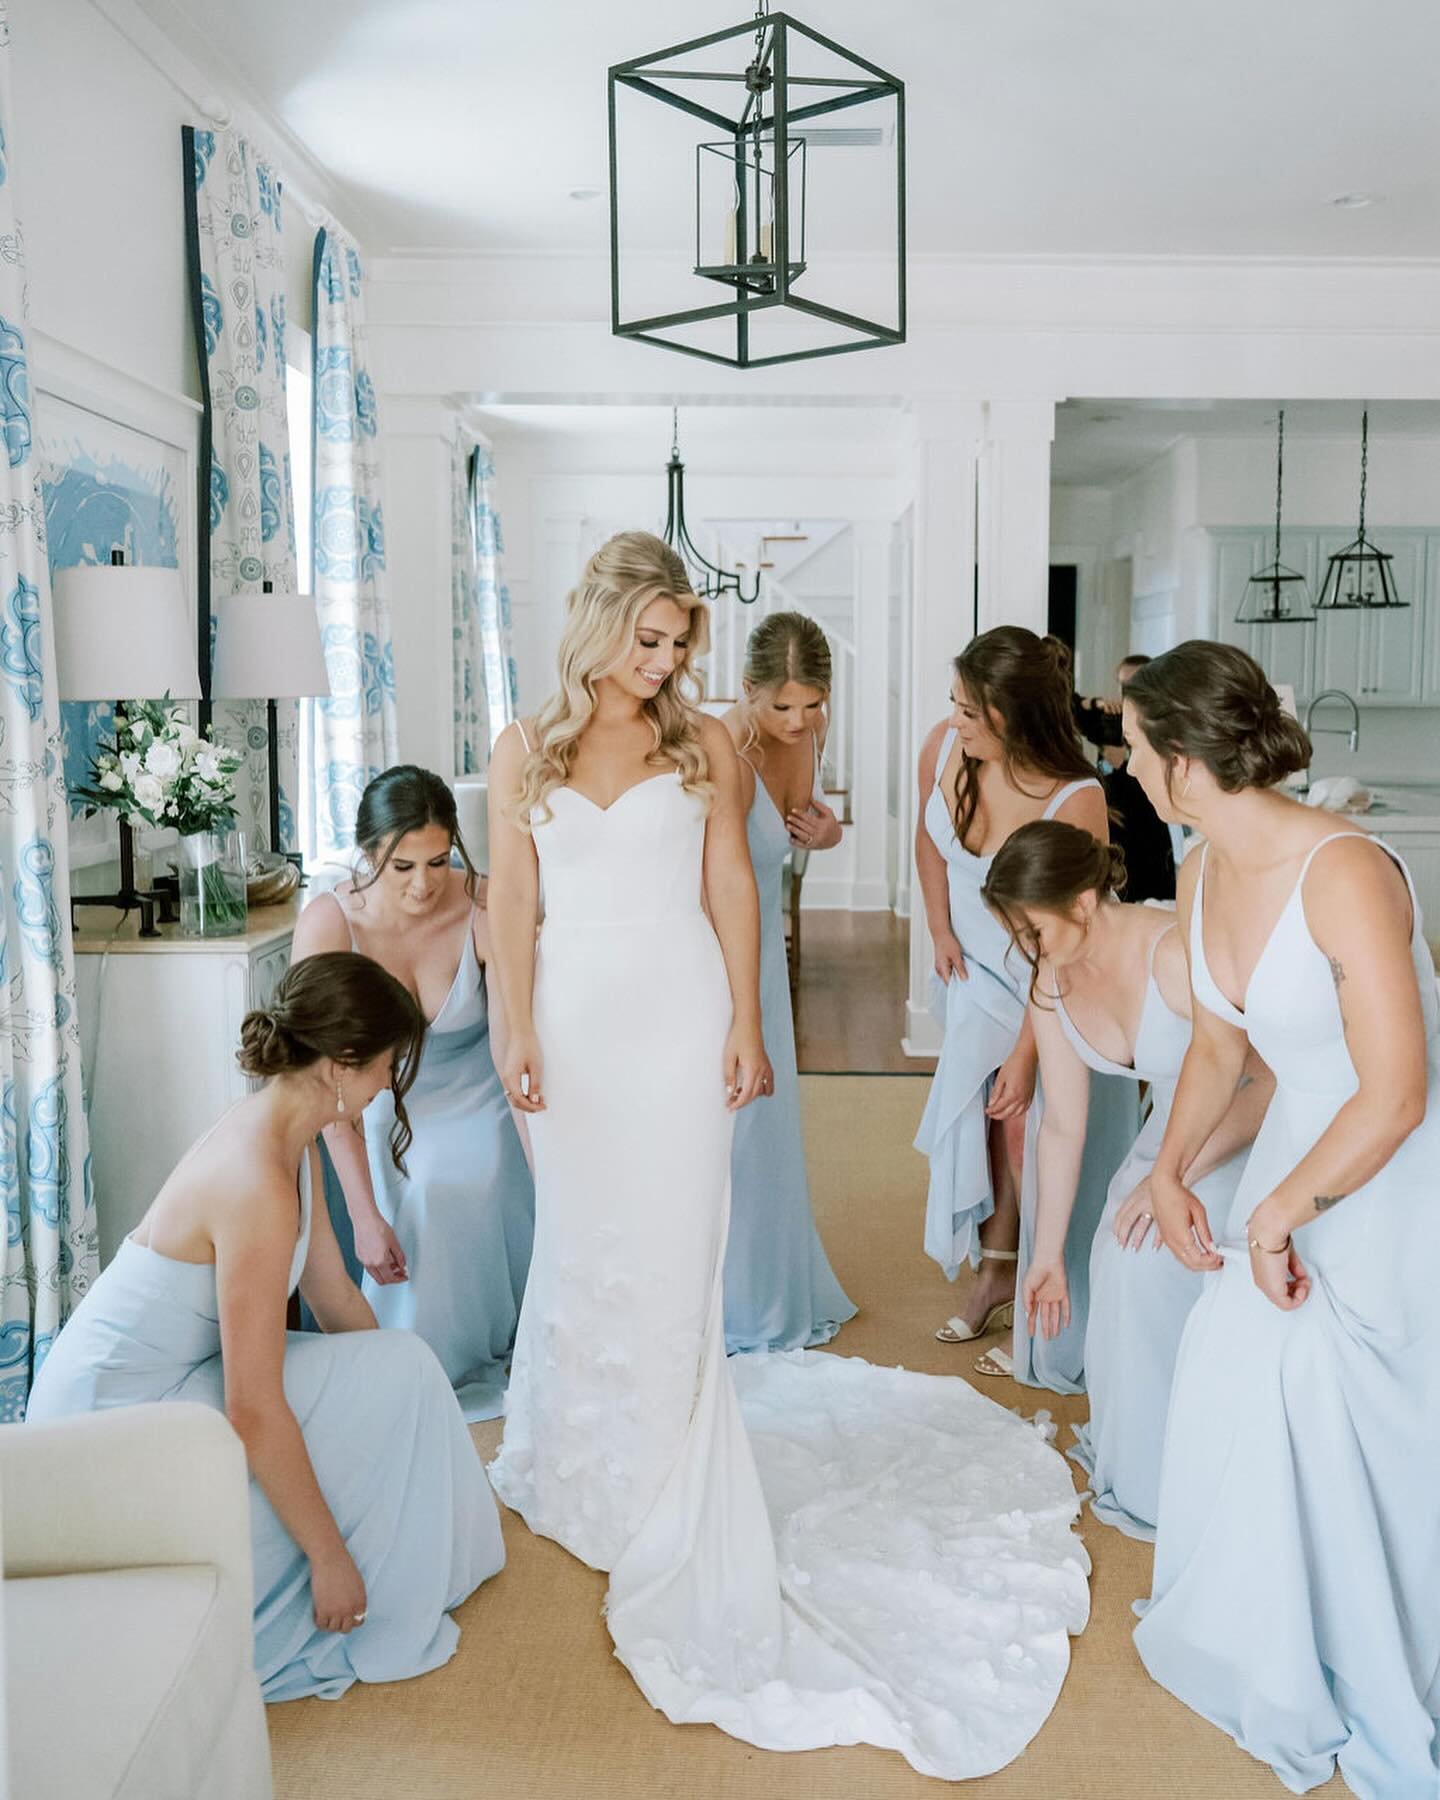 You know what they say&hellip; getting ready is half the fun 🩵 It&rsquo;s a time for pampering, bonding, &amp; anticipation!

#weddingplanning #weddingplanner #floridaweddings #gettingready #grwm #wedding #weddingmakeup #weddingphotography #30a #wed